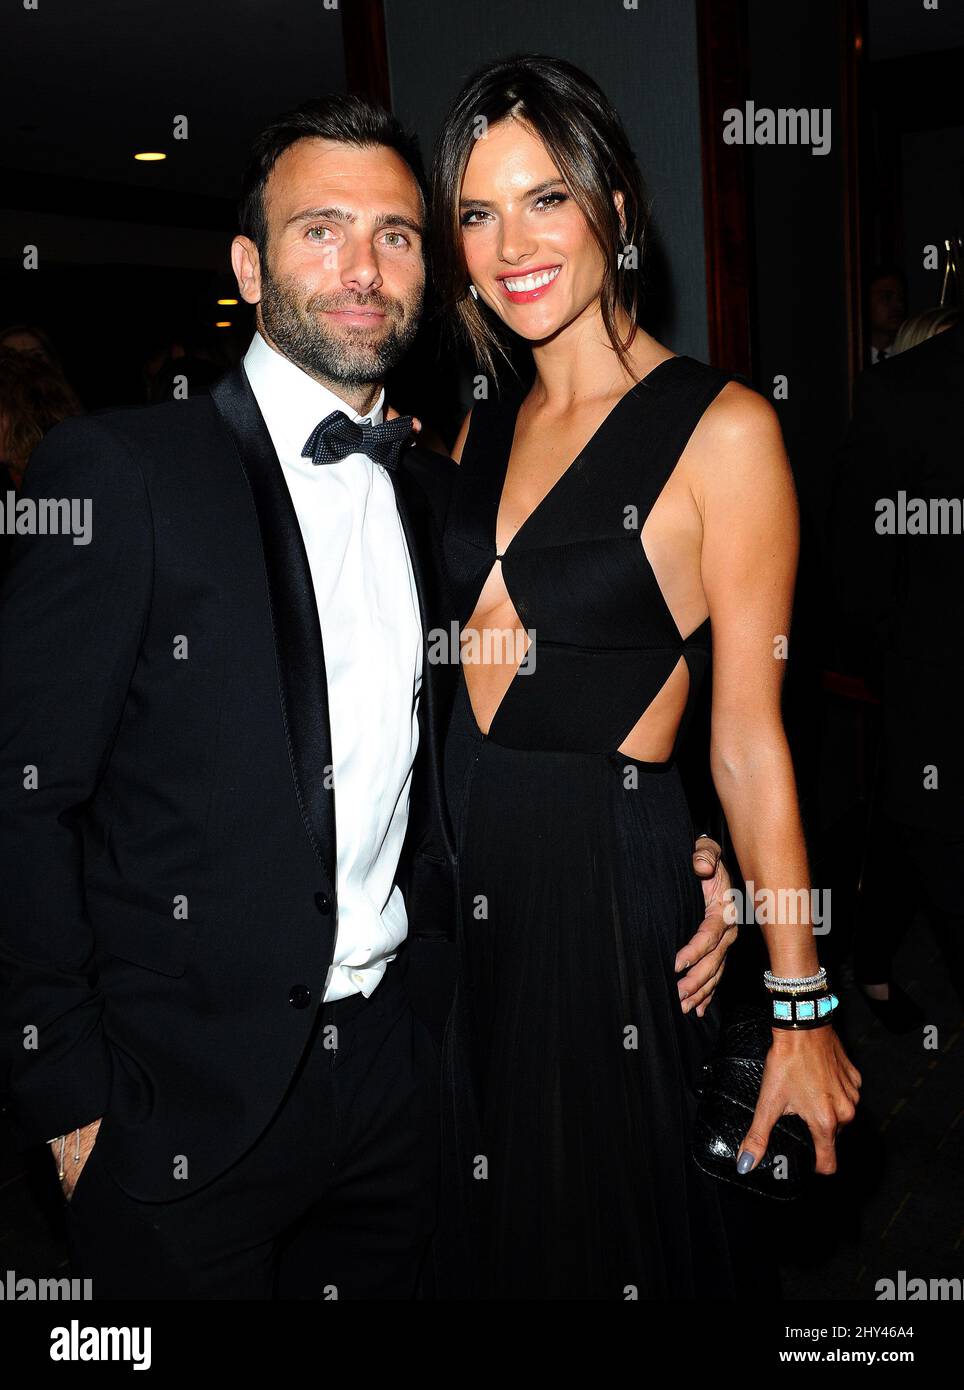 https://c8.alamy.com/comp/2HY46A4/alessandra-ambrosio-and-husband-jamie-mazur-attending-the-21st-annual-race-to-erase-ms-gala-in-los-angeles-california-2HY46A4.jpg